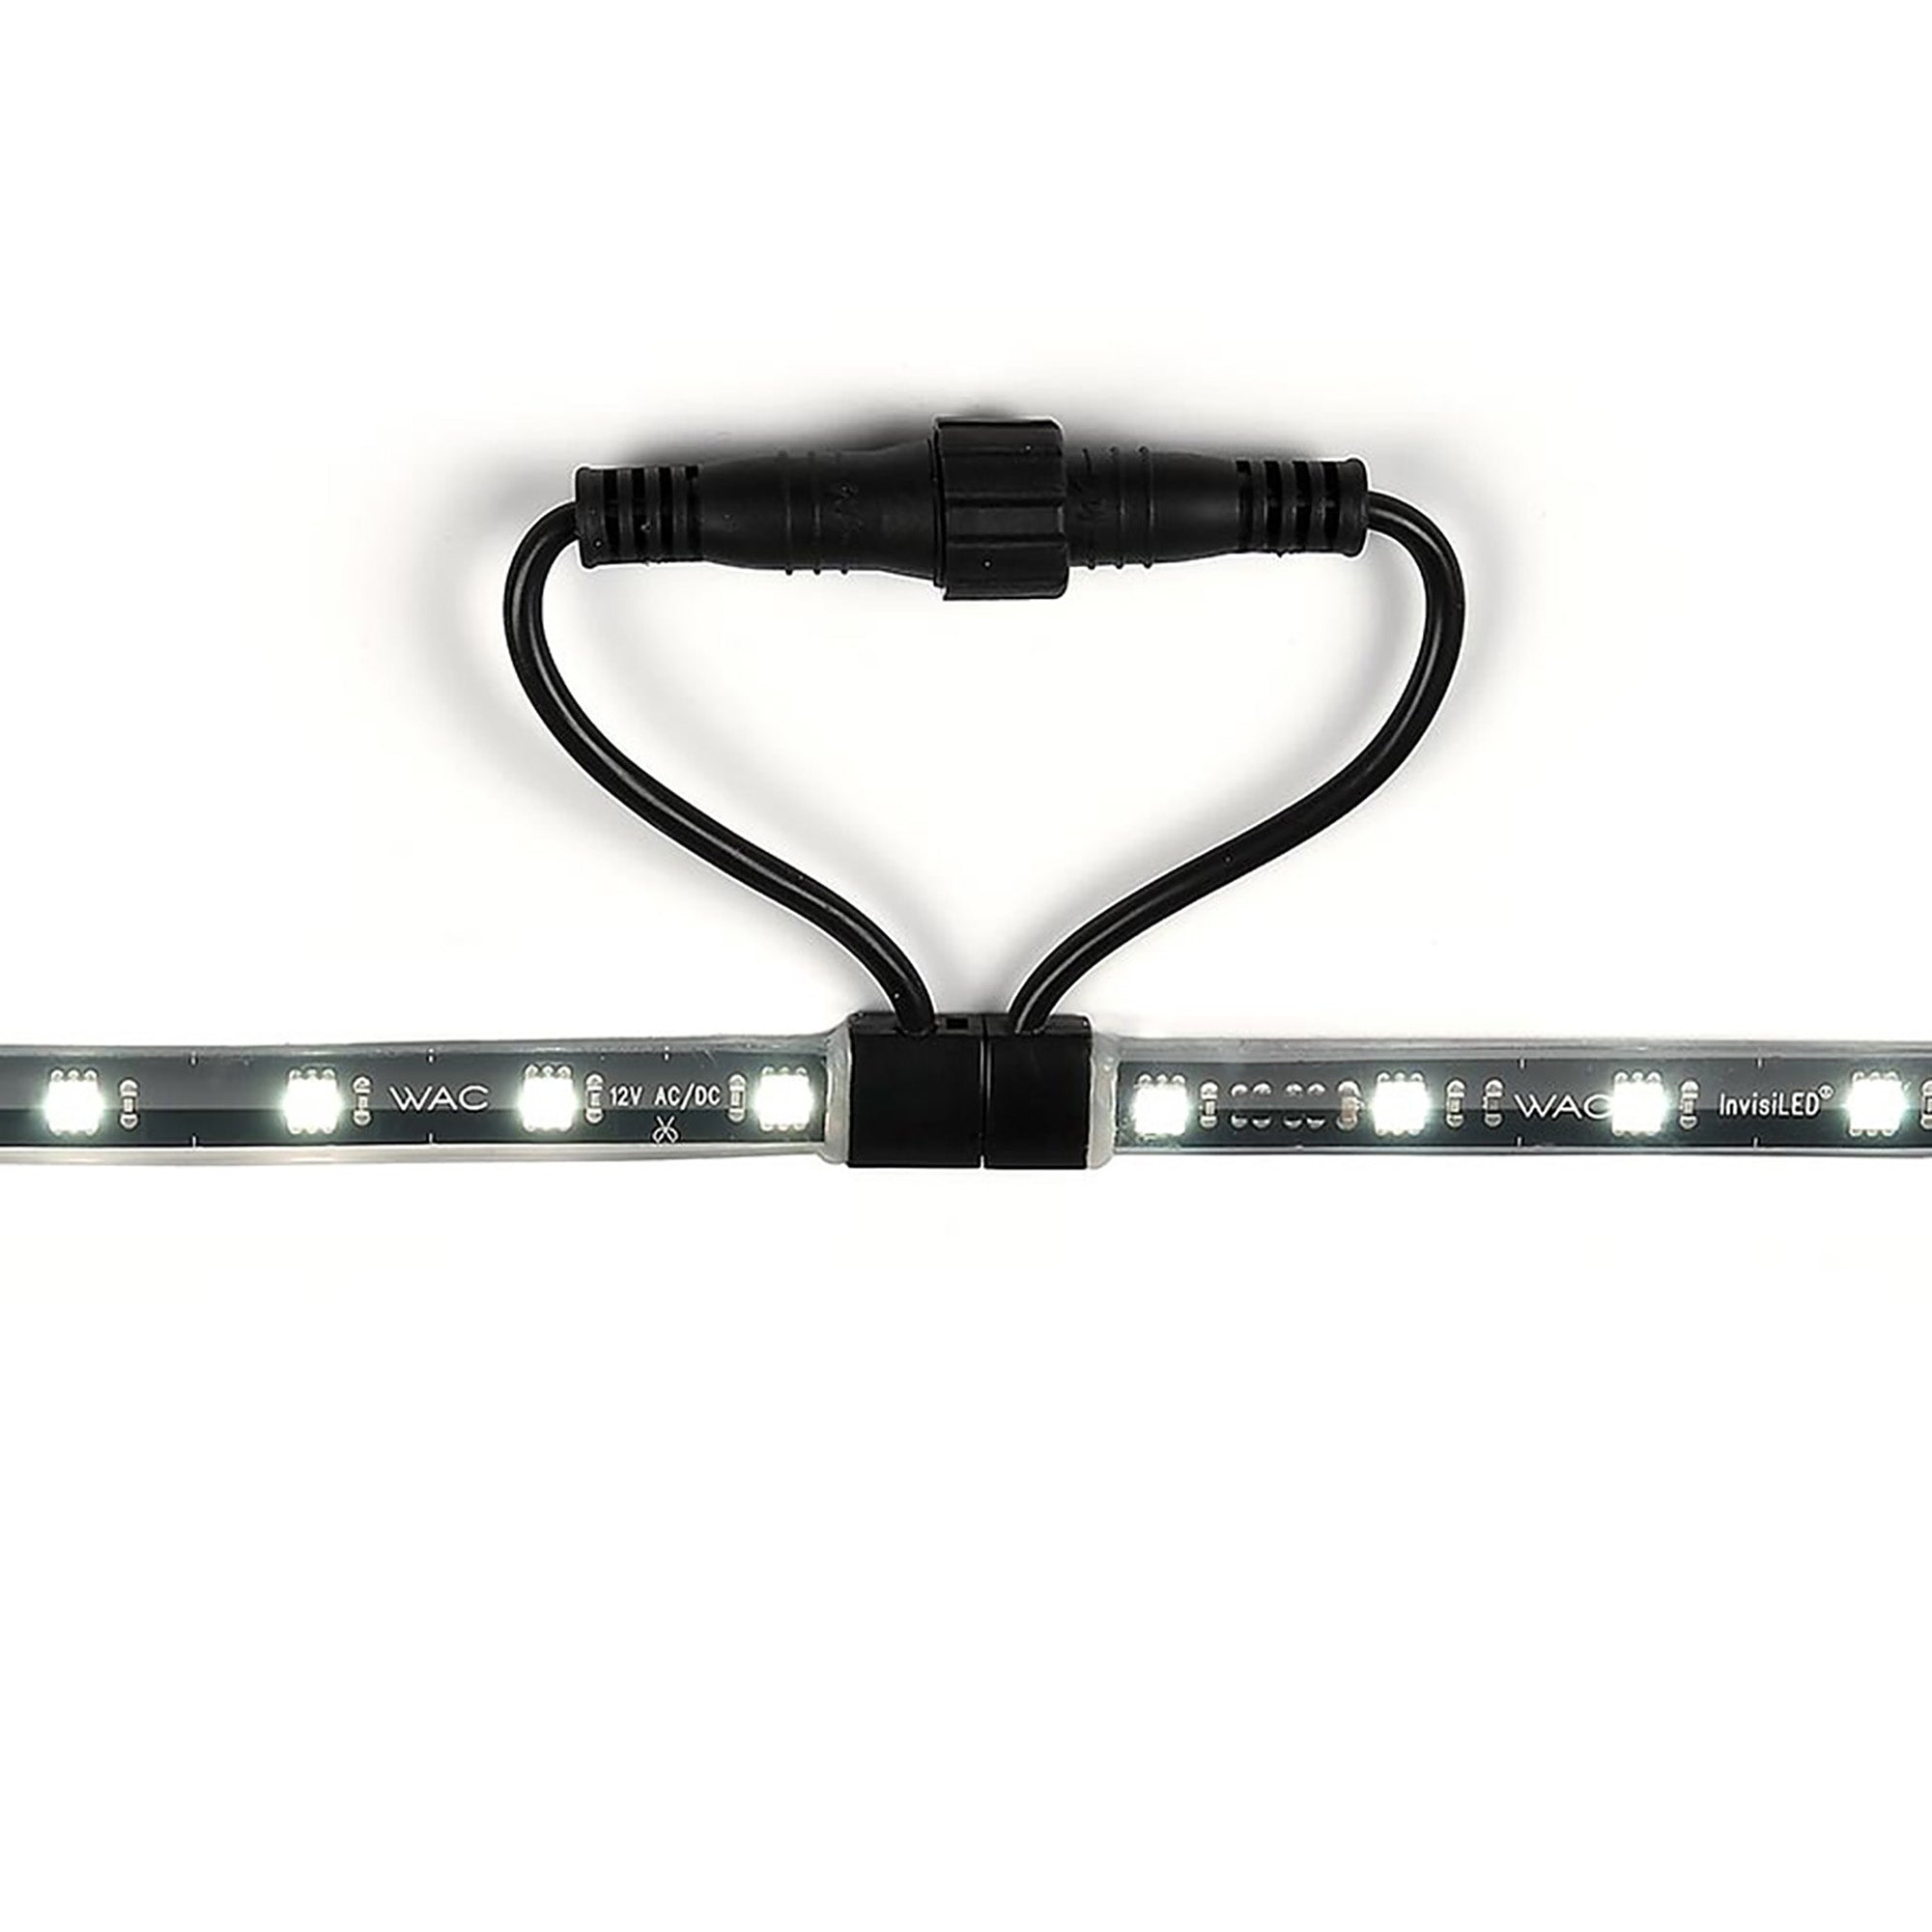 LED 12VDC Indoor/Outdoor IP68 Submersible Strip Light 2W/foot 5ft Length